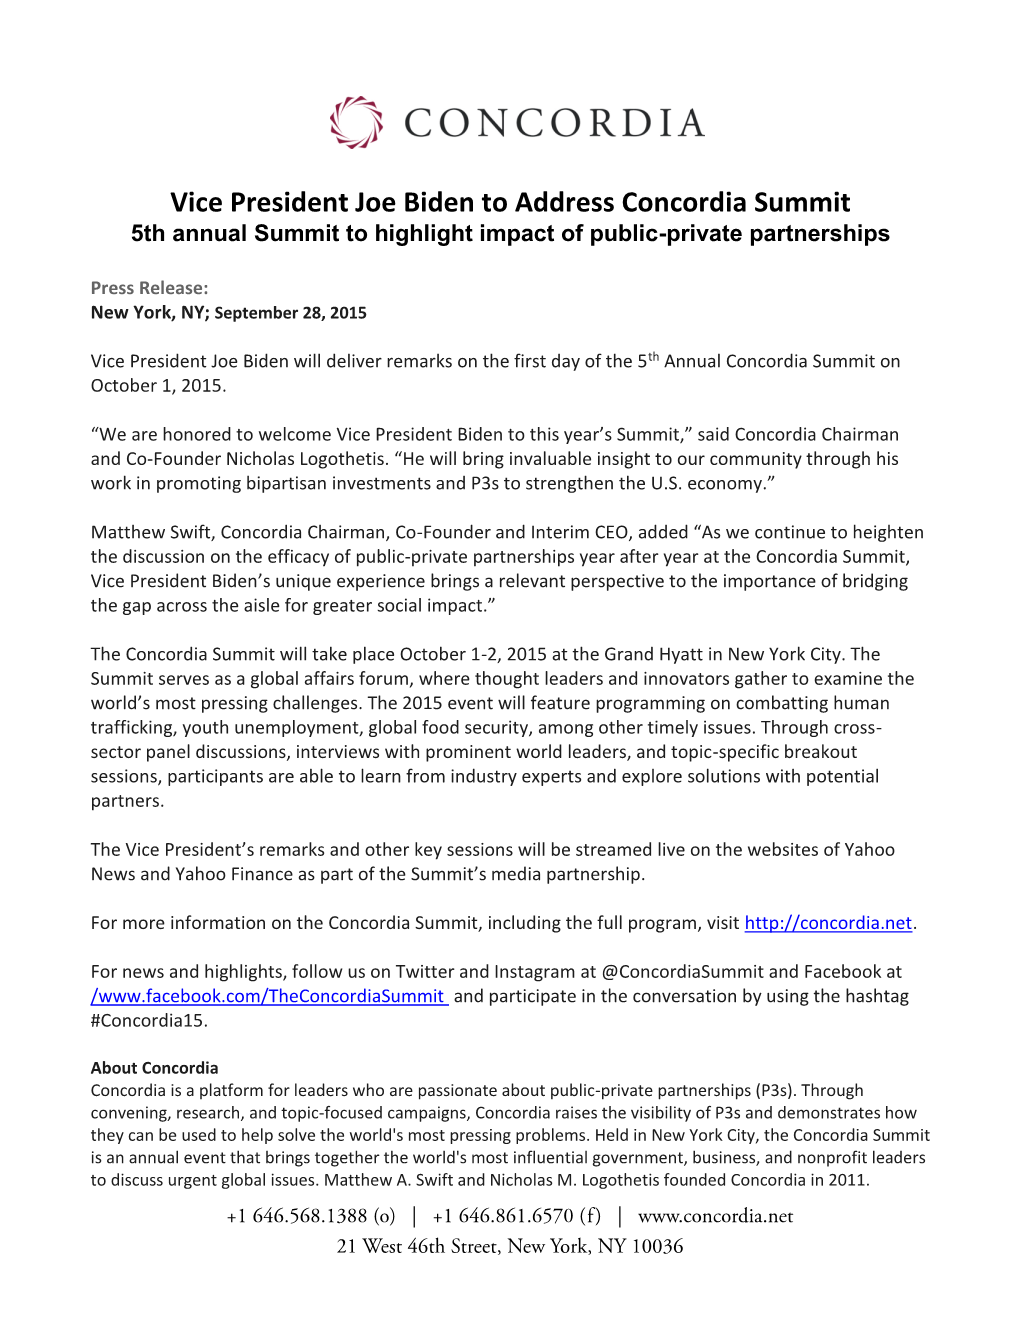 Vice President Joe Biden to Address Concordia Summit 5Th Annual Summit to Highlight Impact of Public-Private Partnerships